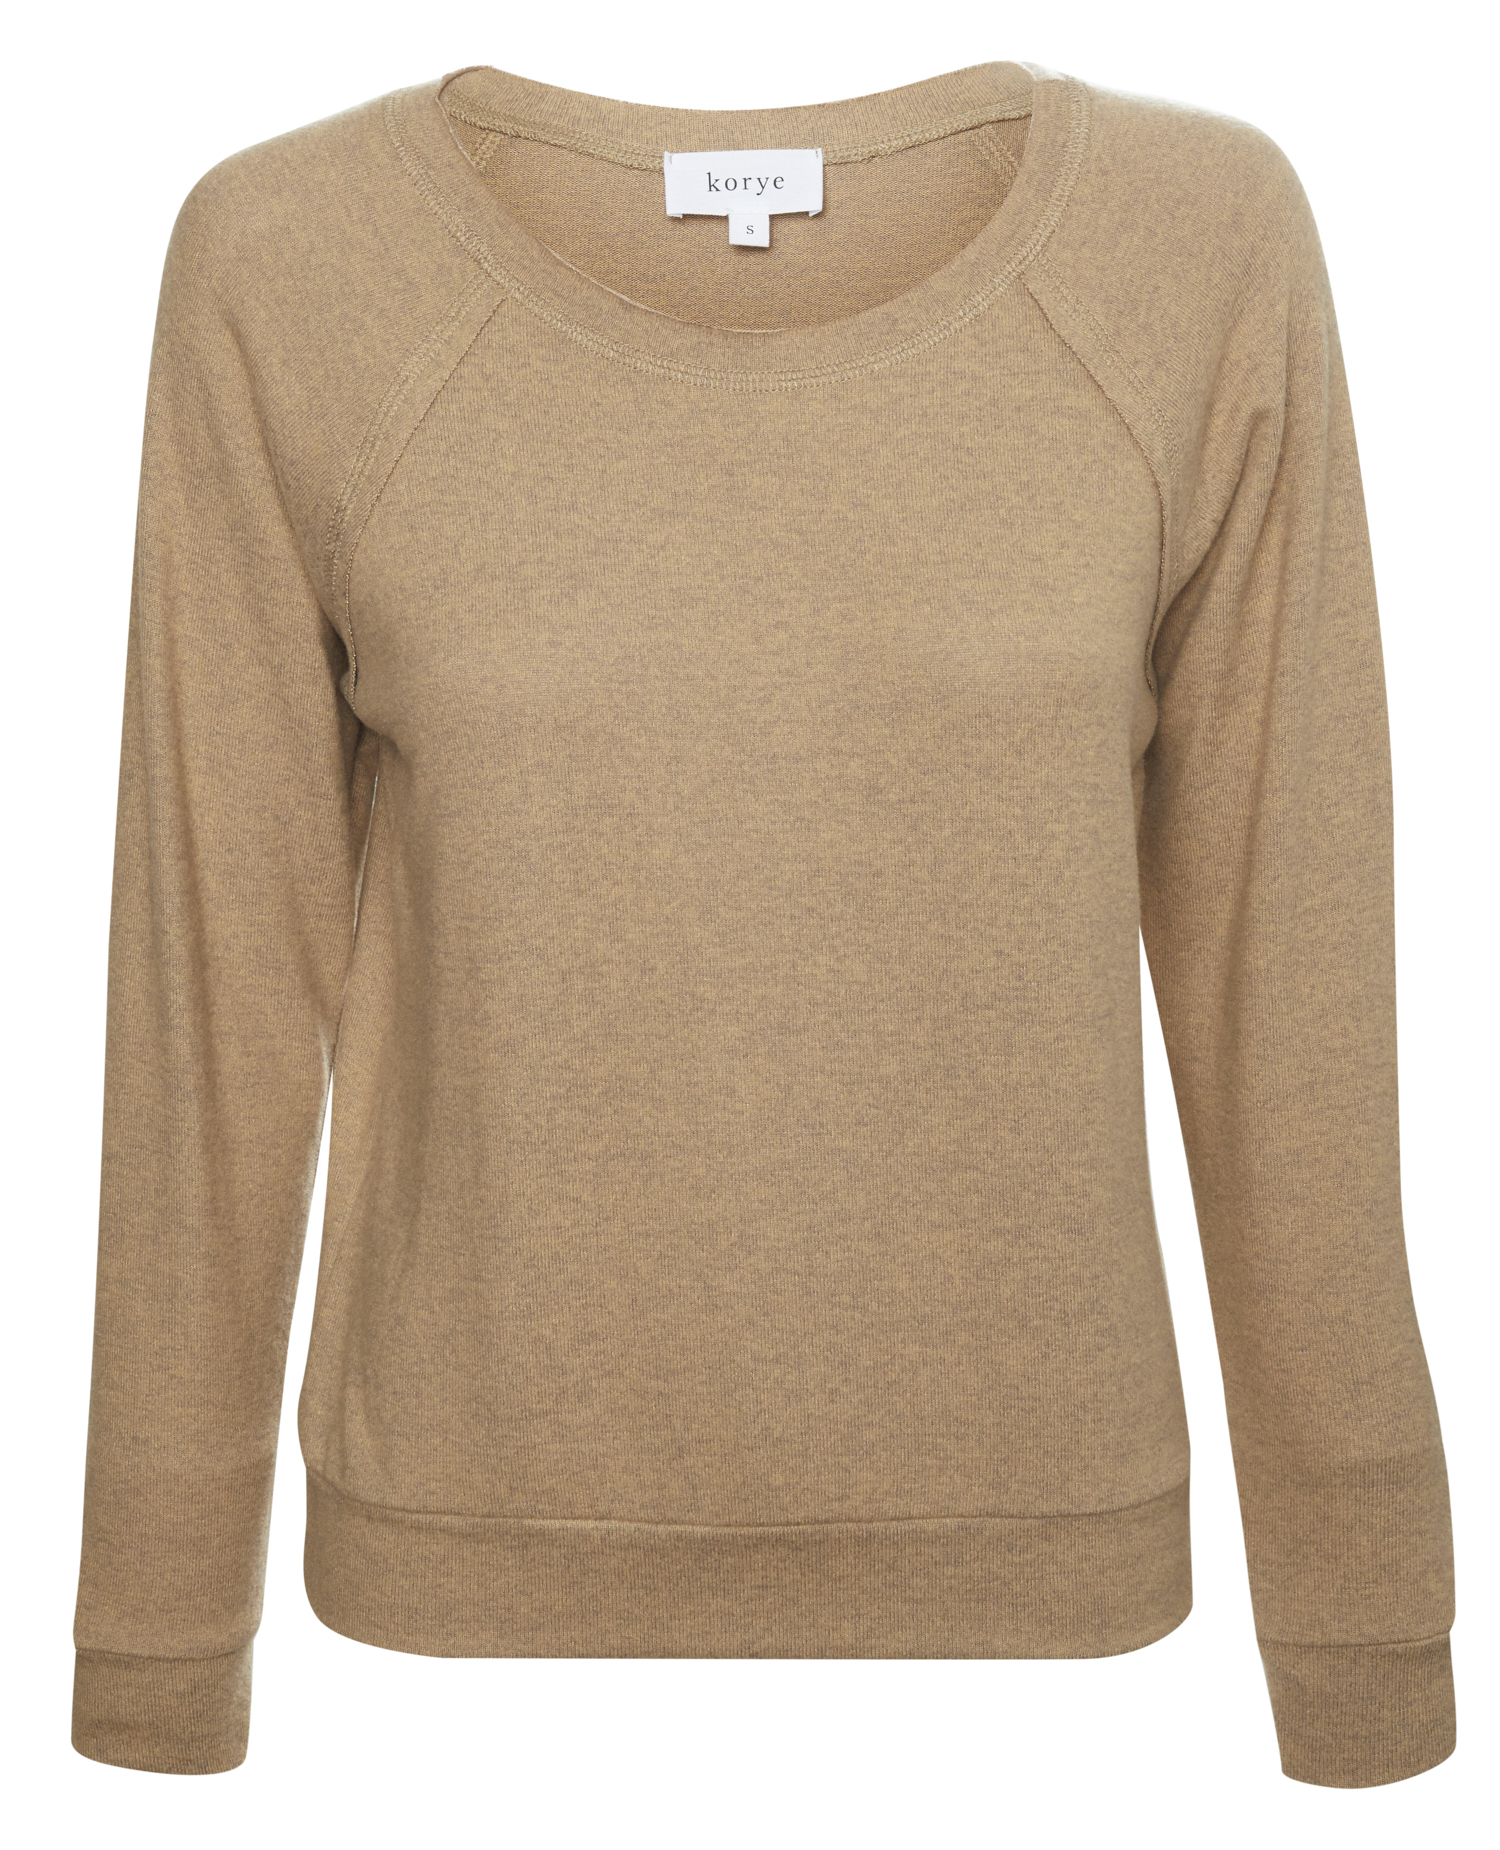 Brushed Hacci Pullover